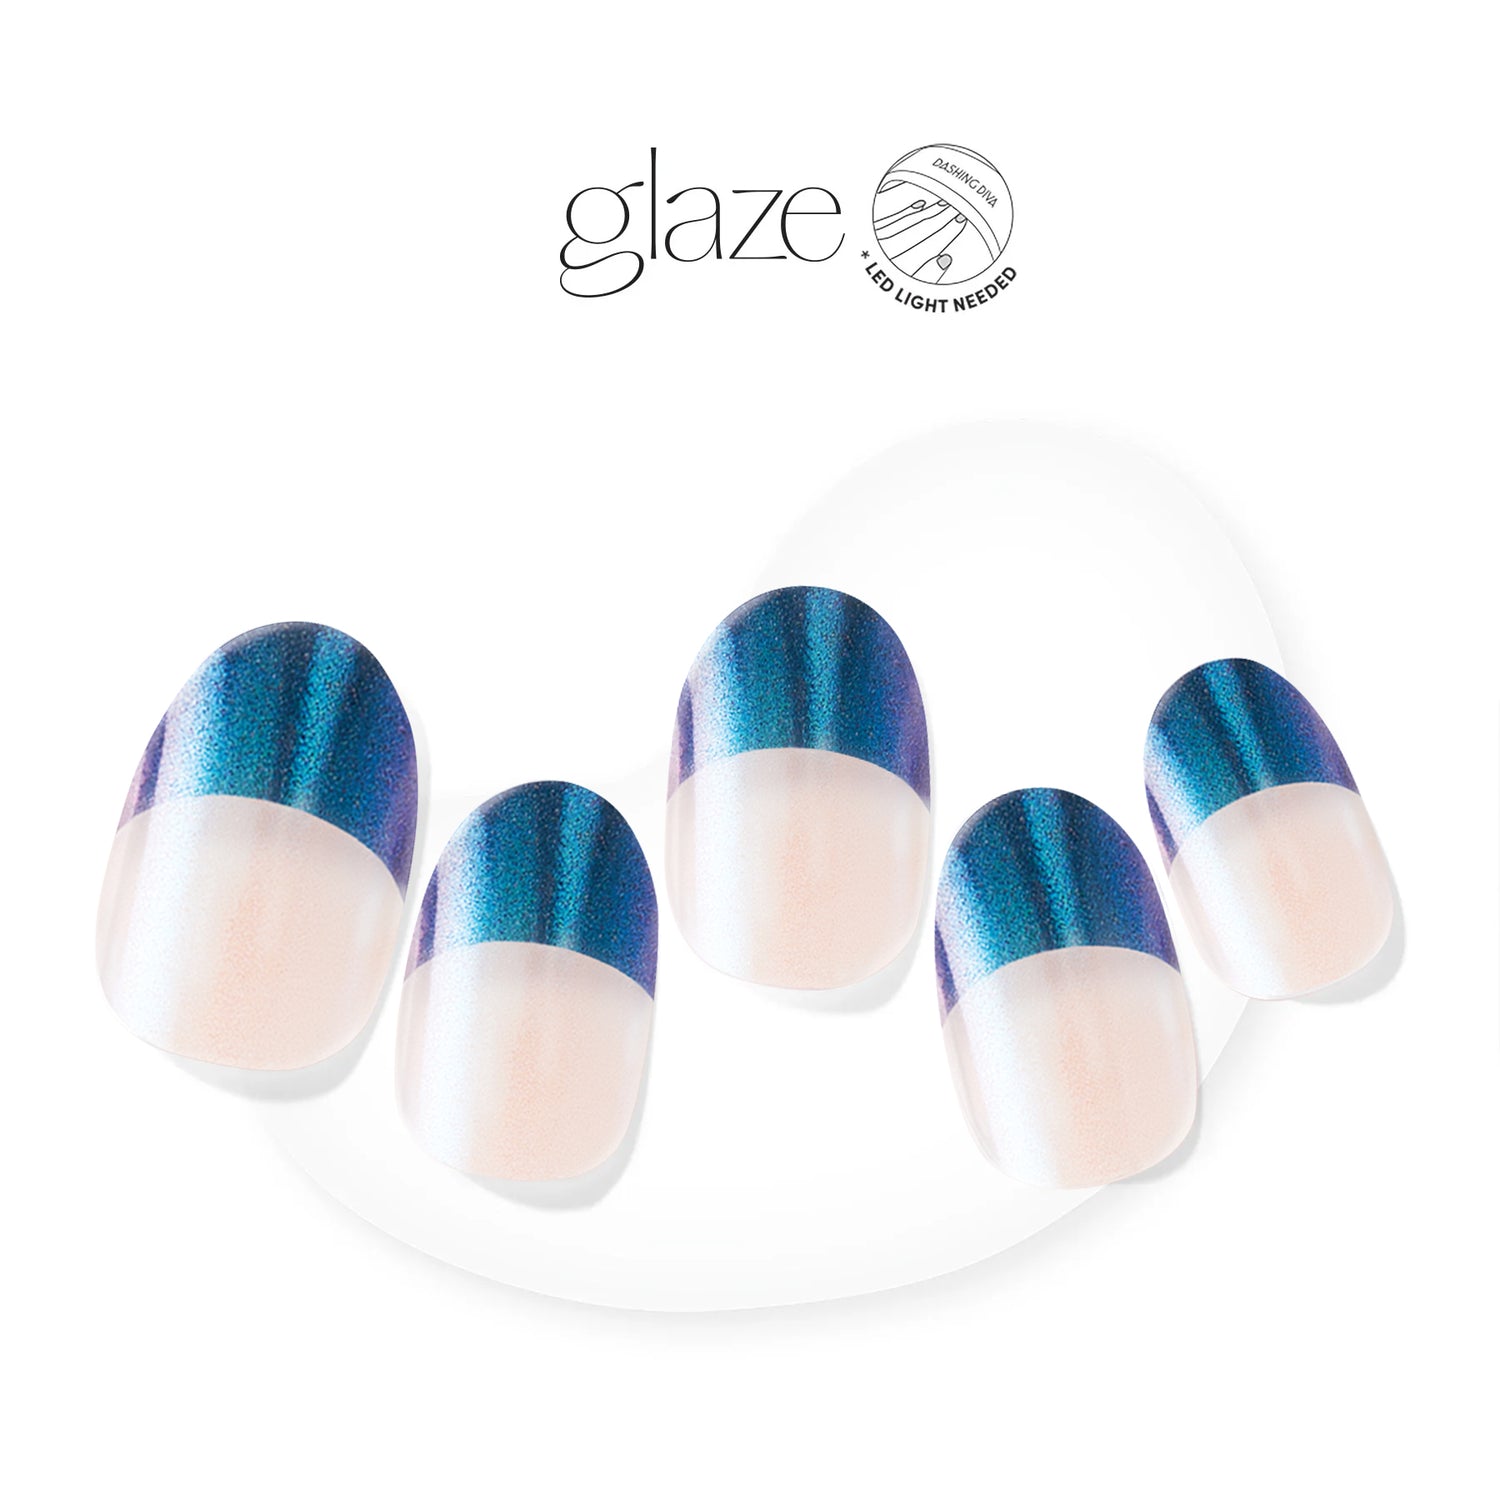  Semi-cured sheer nude gel nail strips featuring dark blue french tips and a shimmery, iridescent chrome finish with mega volume & maximum shine.